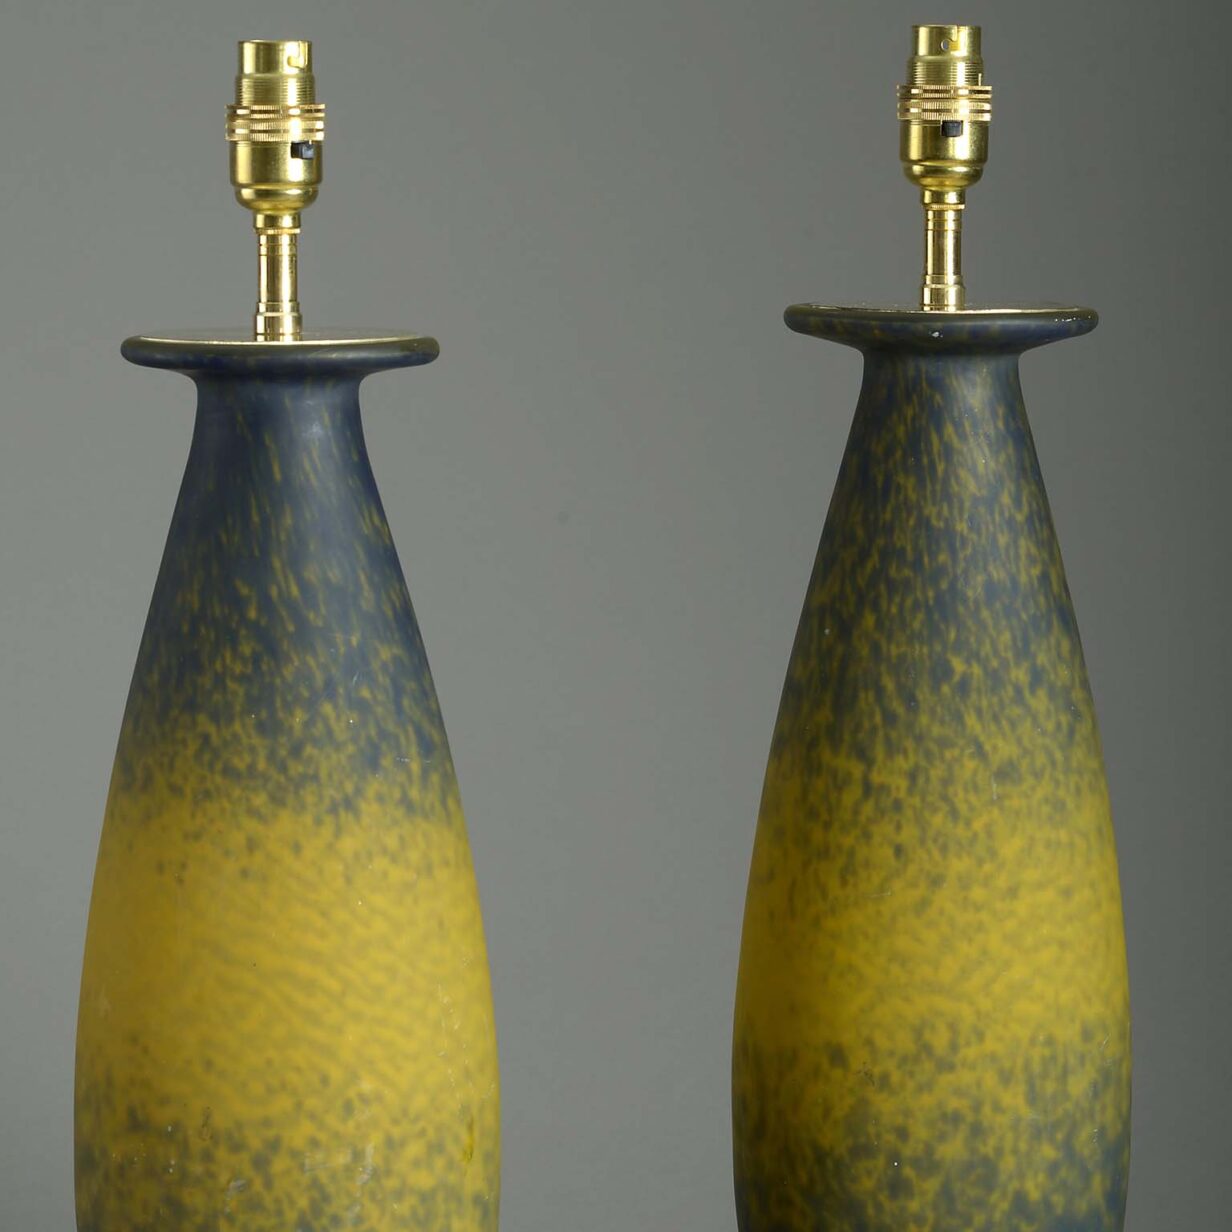 Pair of glass vase table lamps